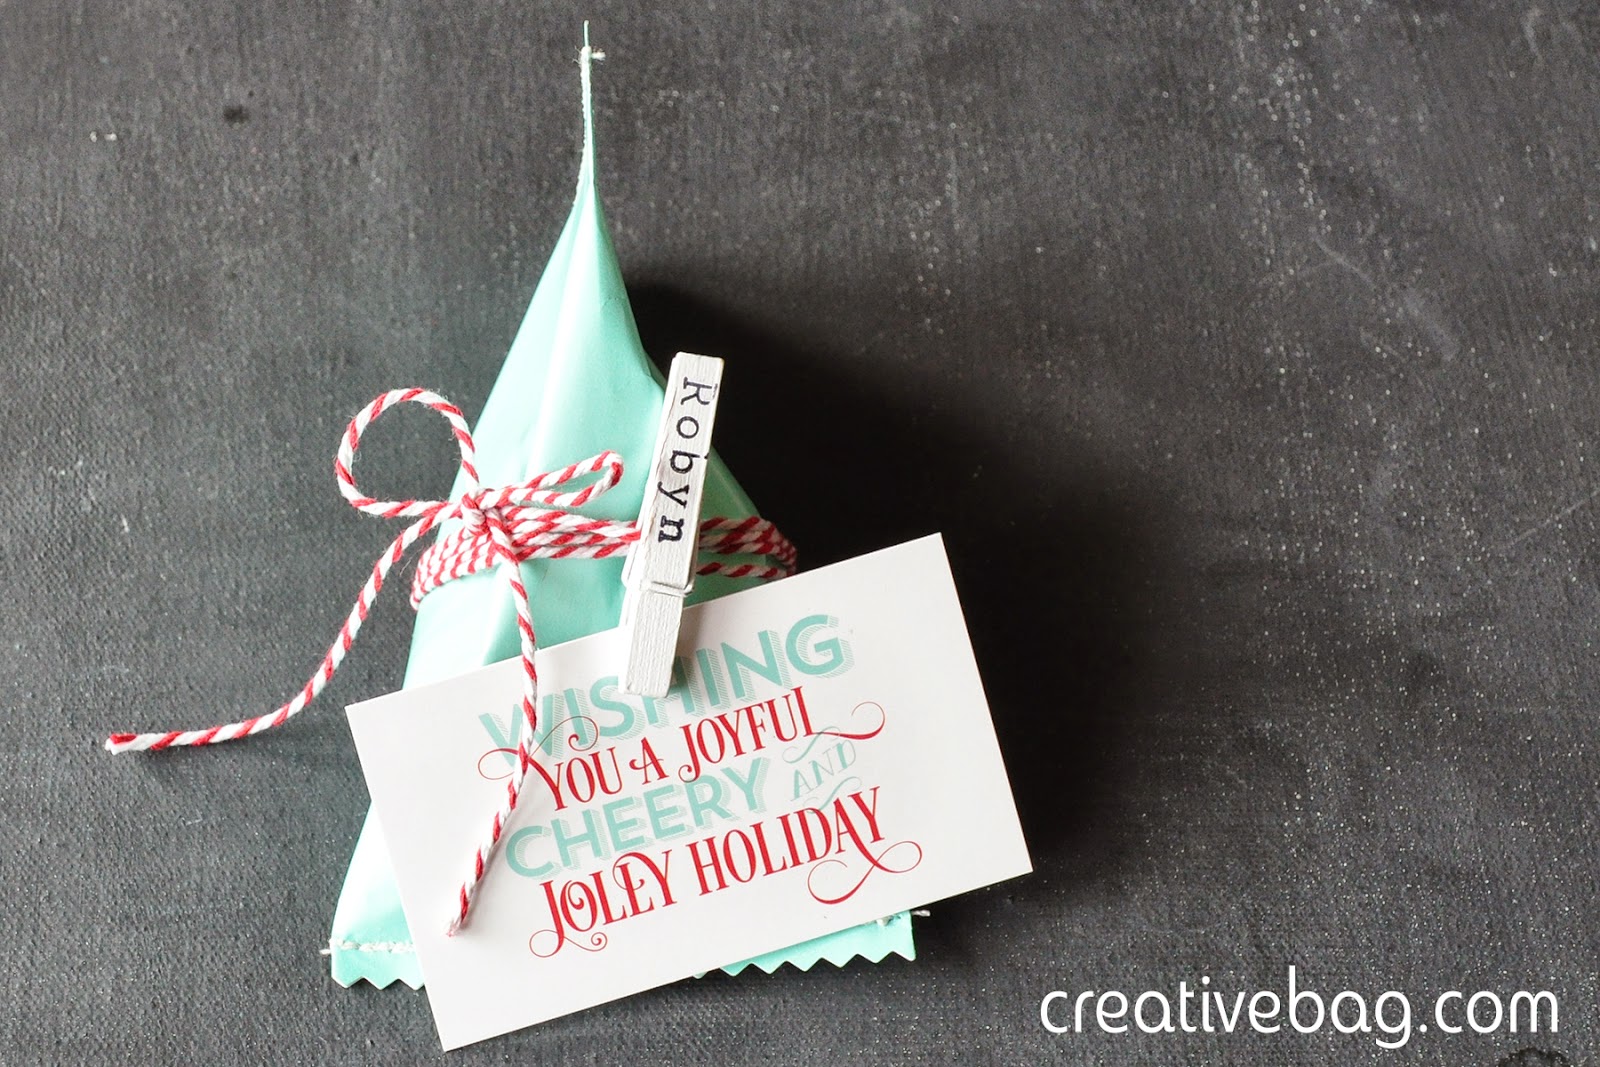 get creative with wrapping paper | Creative Bag {dot} com